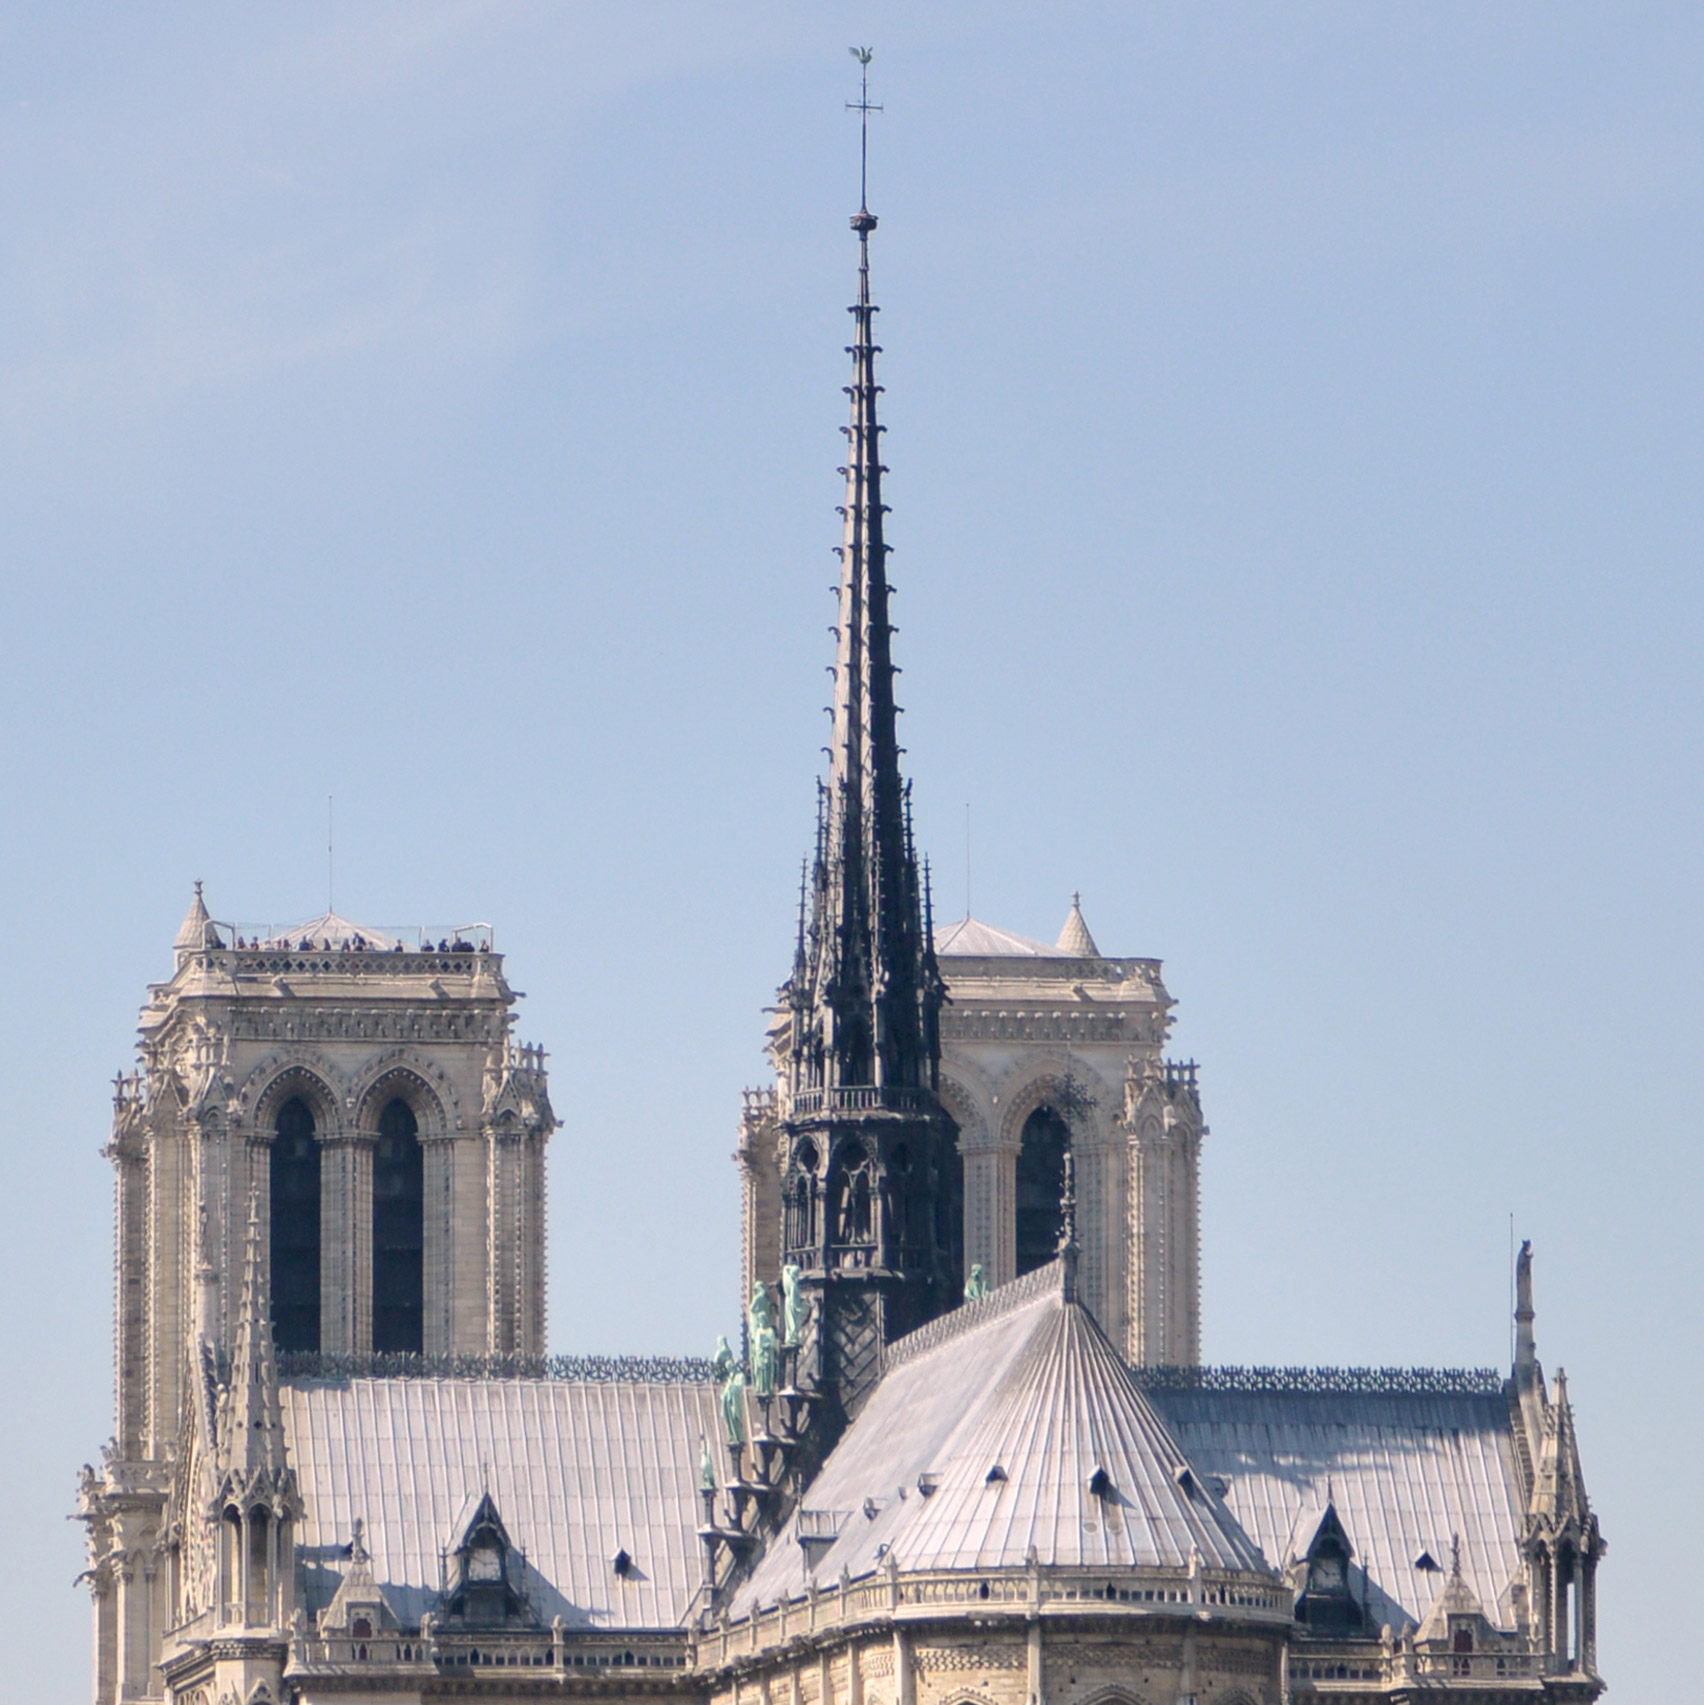 notre-dame-cathedral-paris-before-fire-sq_b.jpg